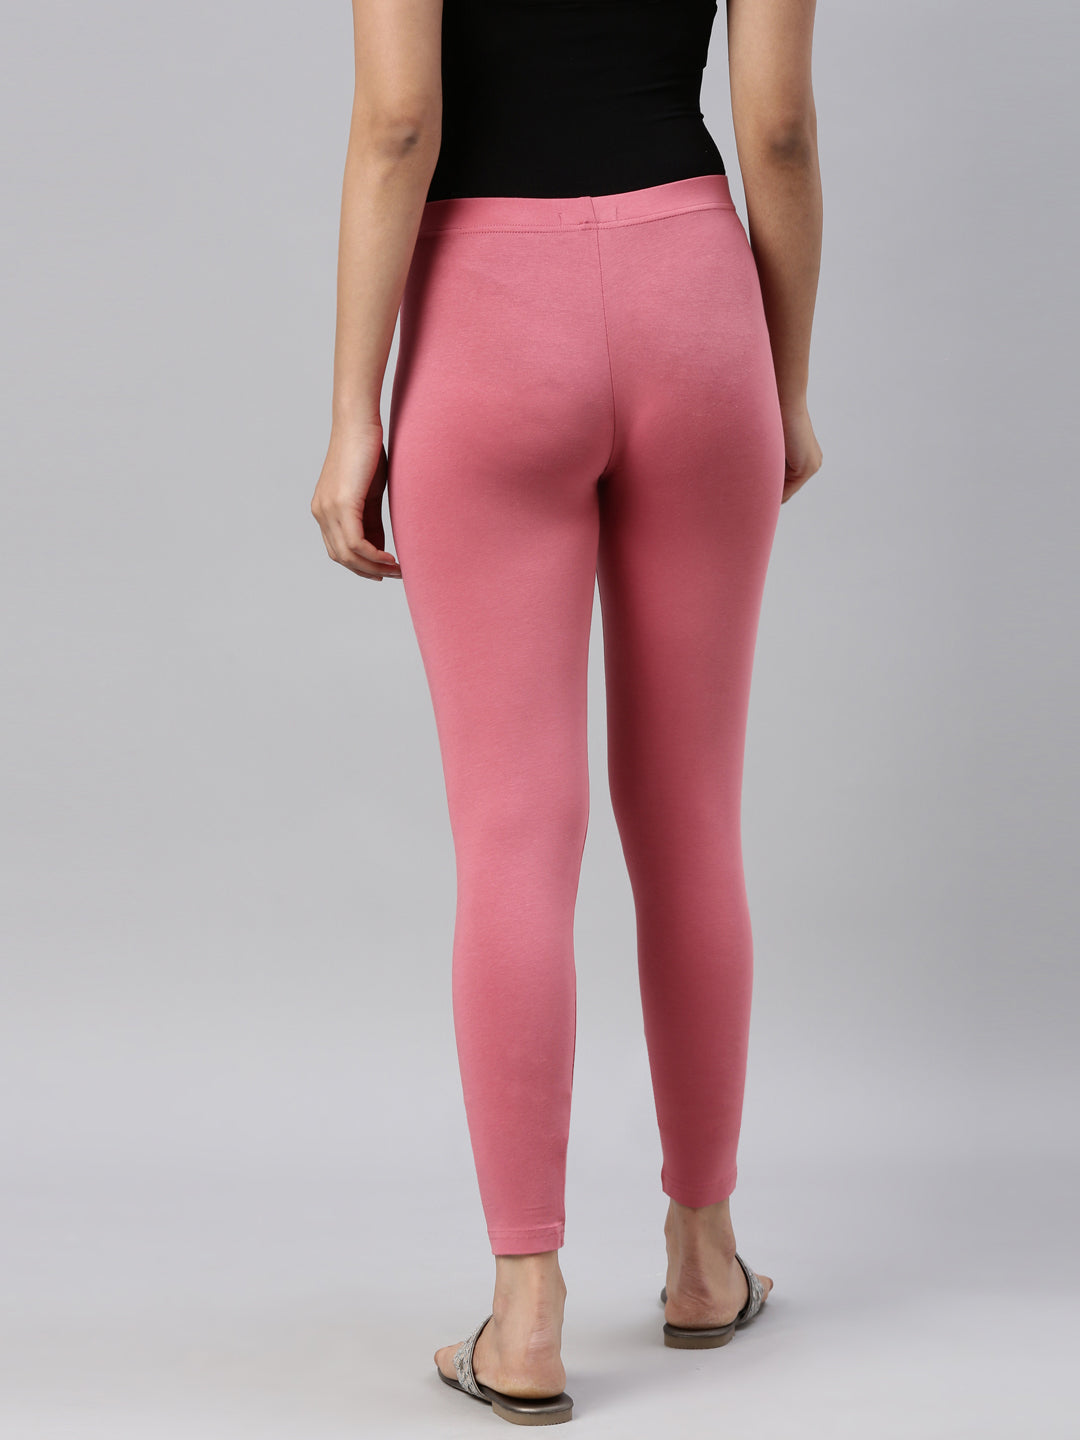 Go Colors Rusty Pink Ankle Length Leggings - Get Best Price from